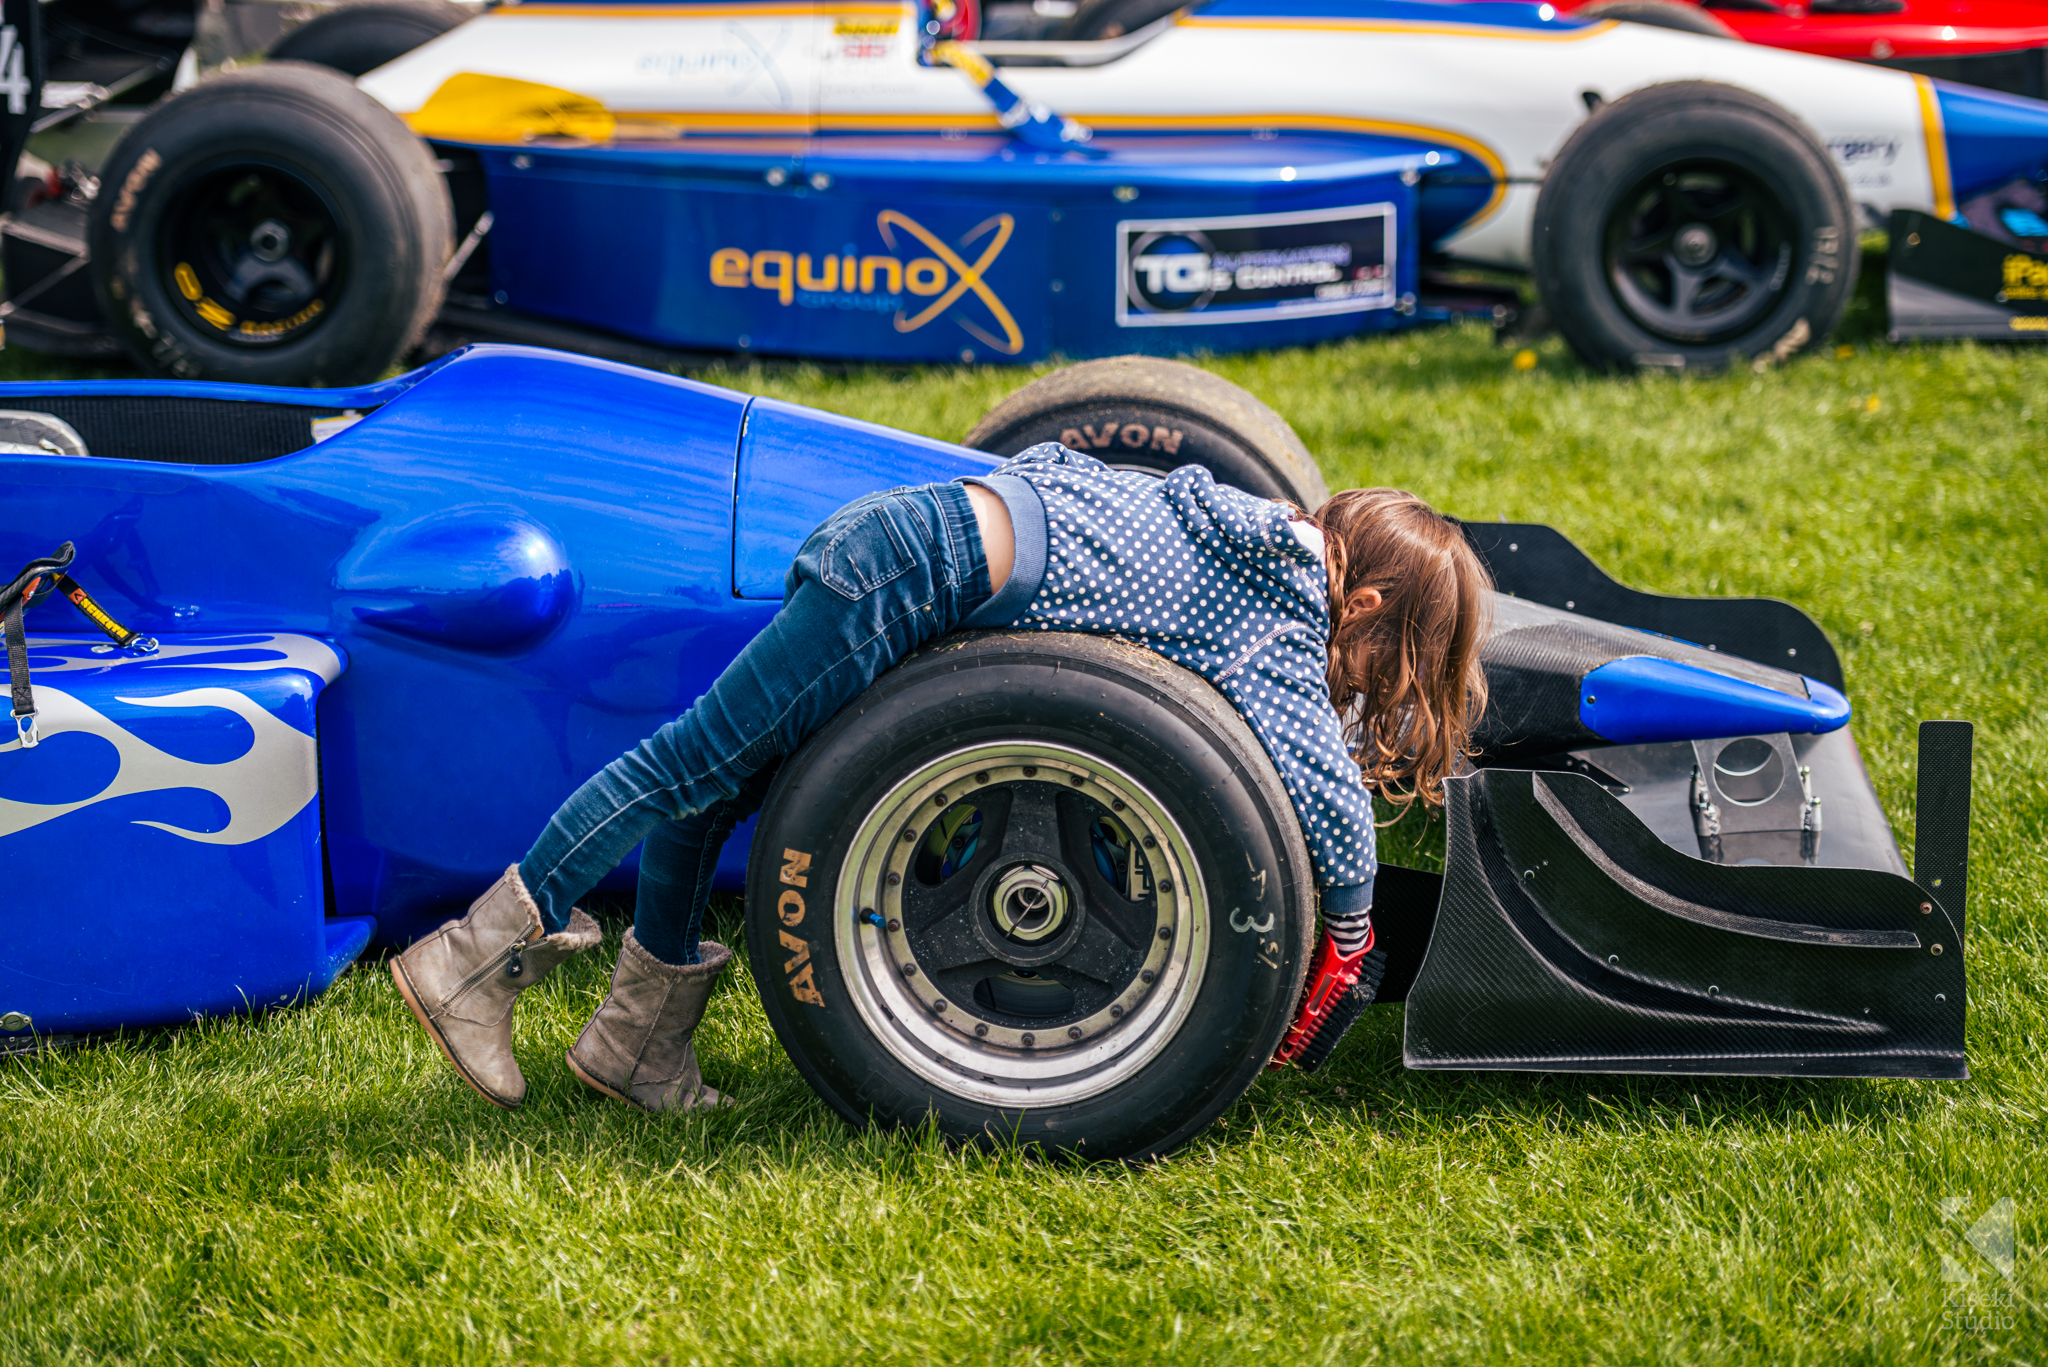 harewood-speed-hillclimb-cleaning-tyres-girl-young-helpful-cute-single-seatere